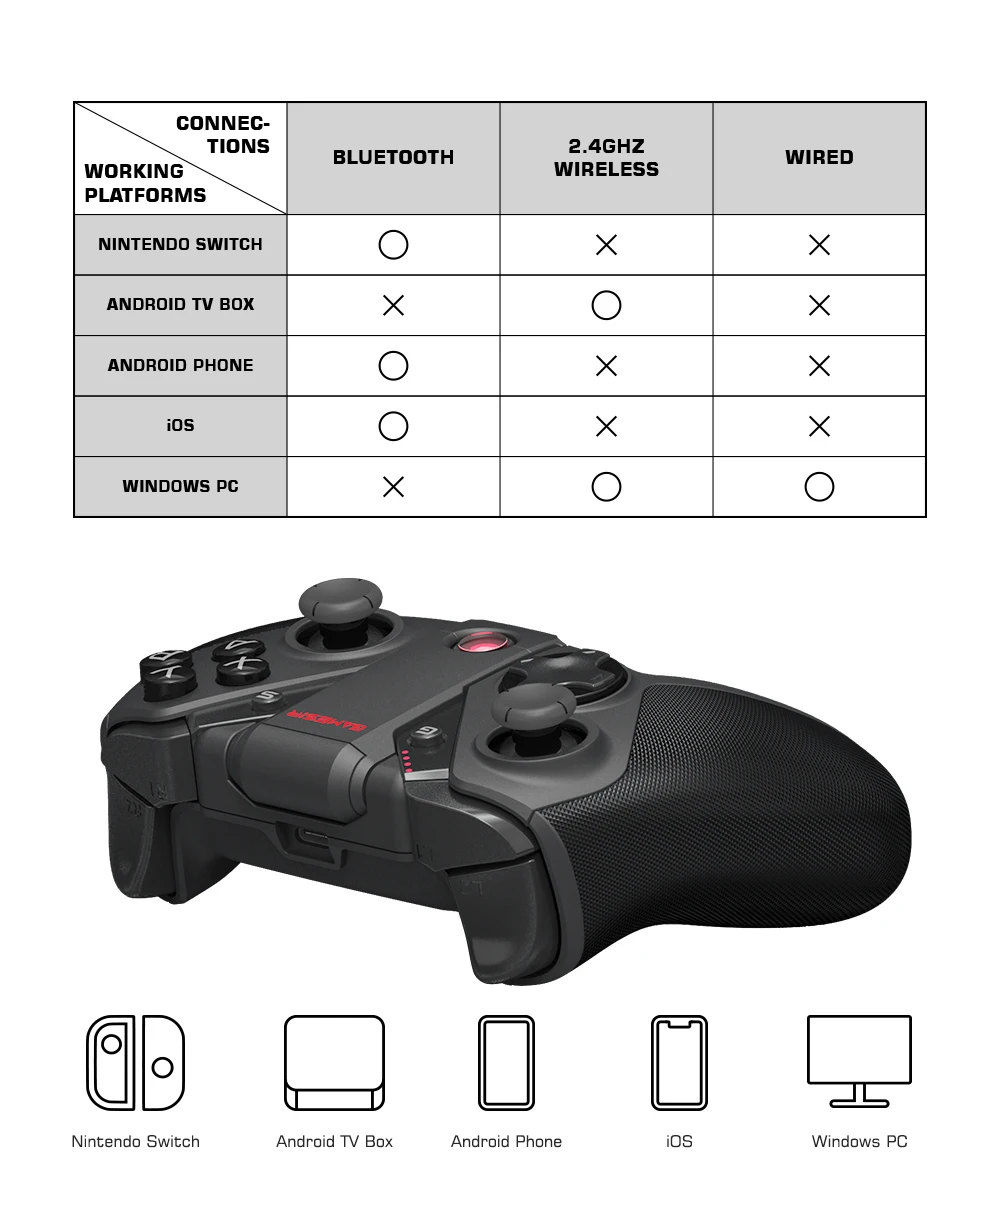 Gamesir g4 pro wireless bluetooth controller/ gamepad for nintendo switch apple arcade mfi game xbox cloud gaming android pc (black)